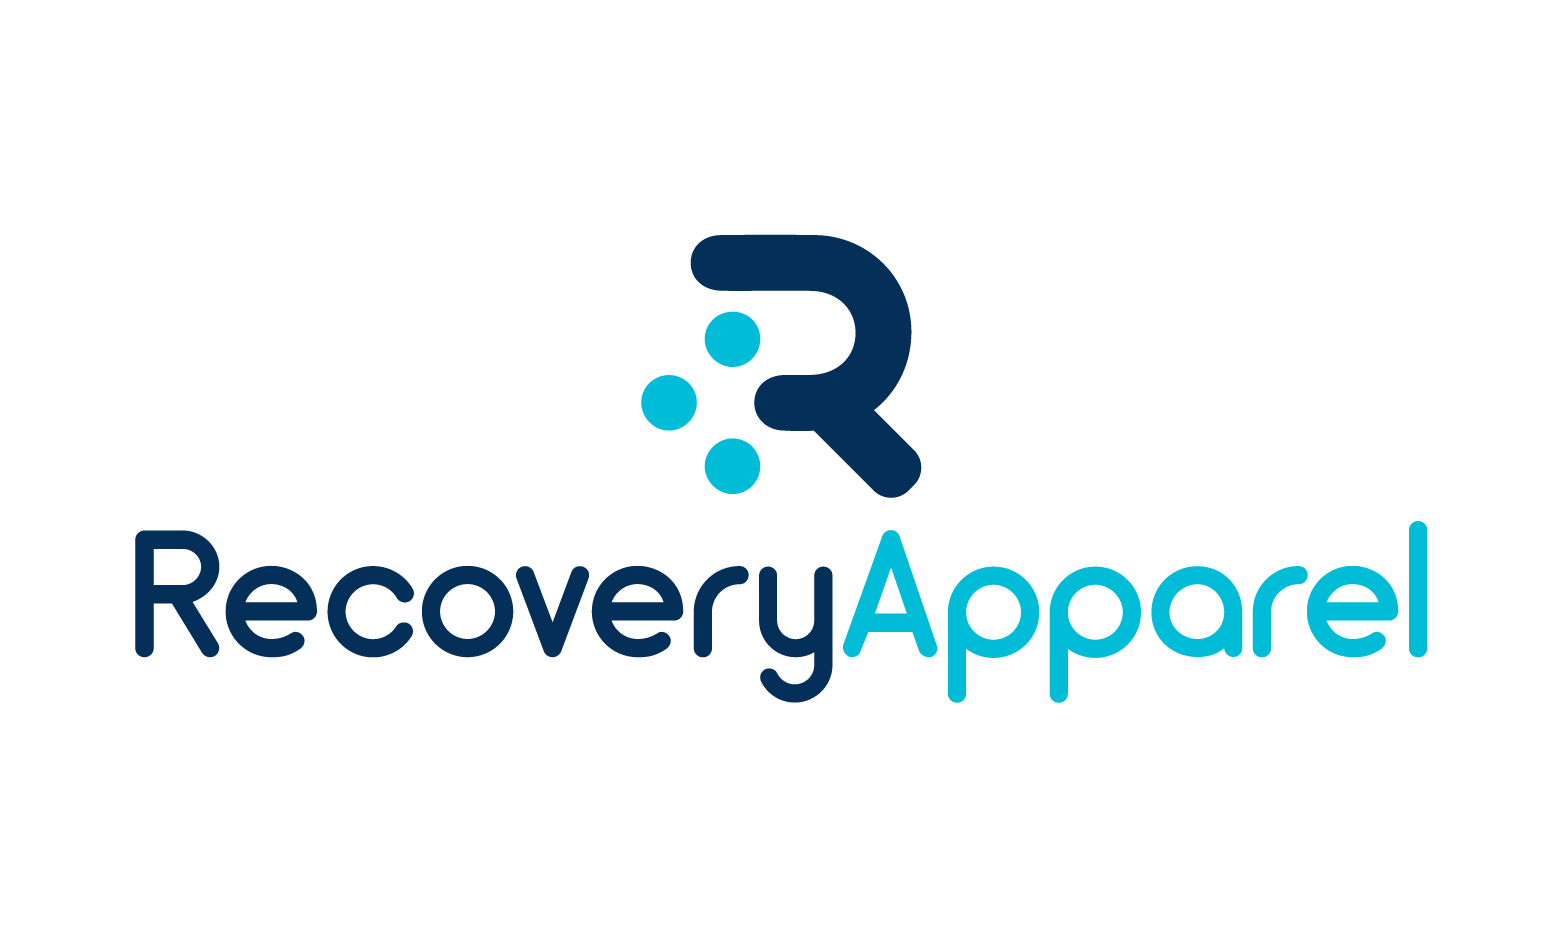 RecoveryApparel.com - Creative brandable domain for sale